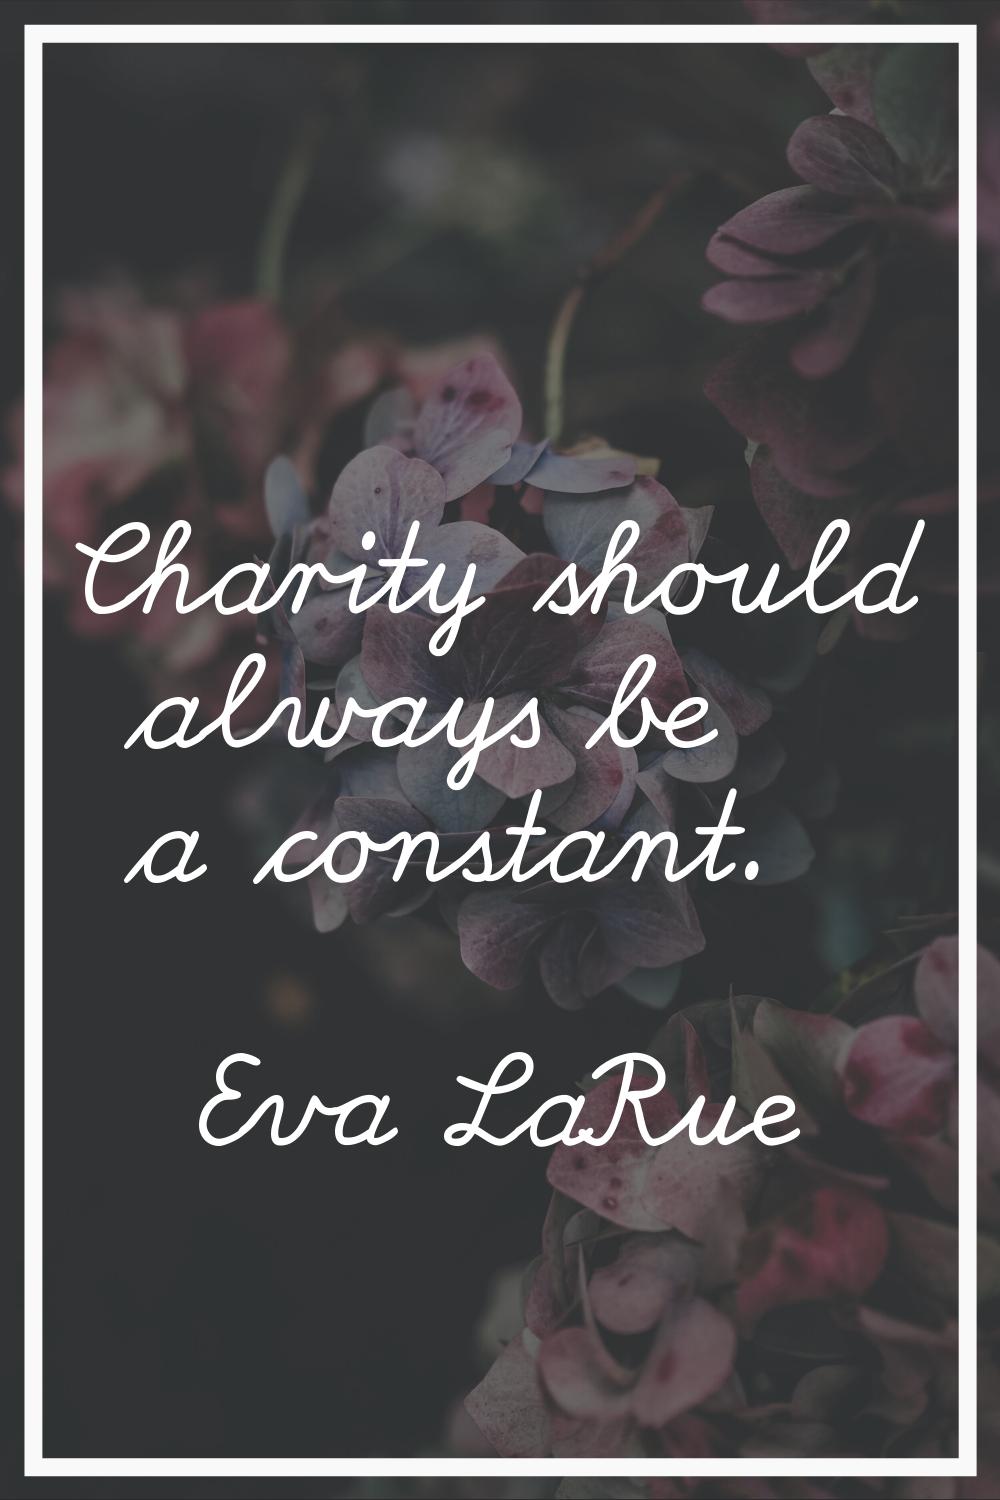 Charity should always be a constant.